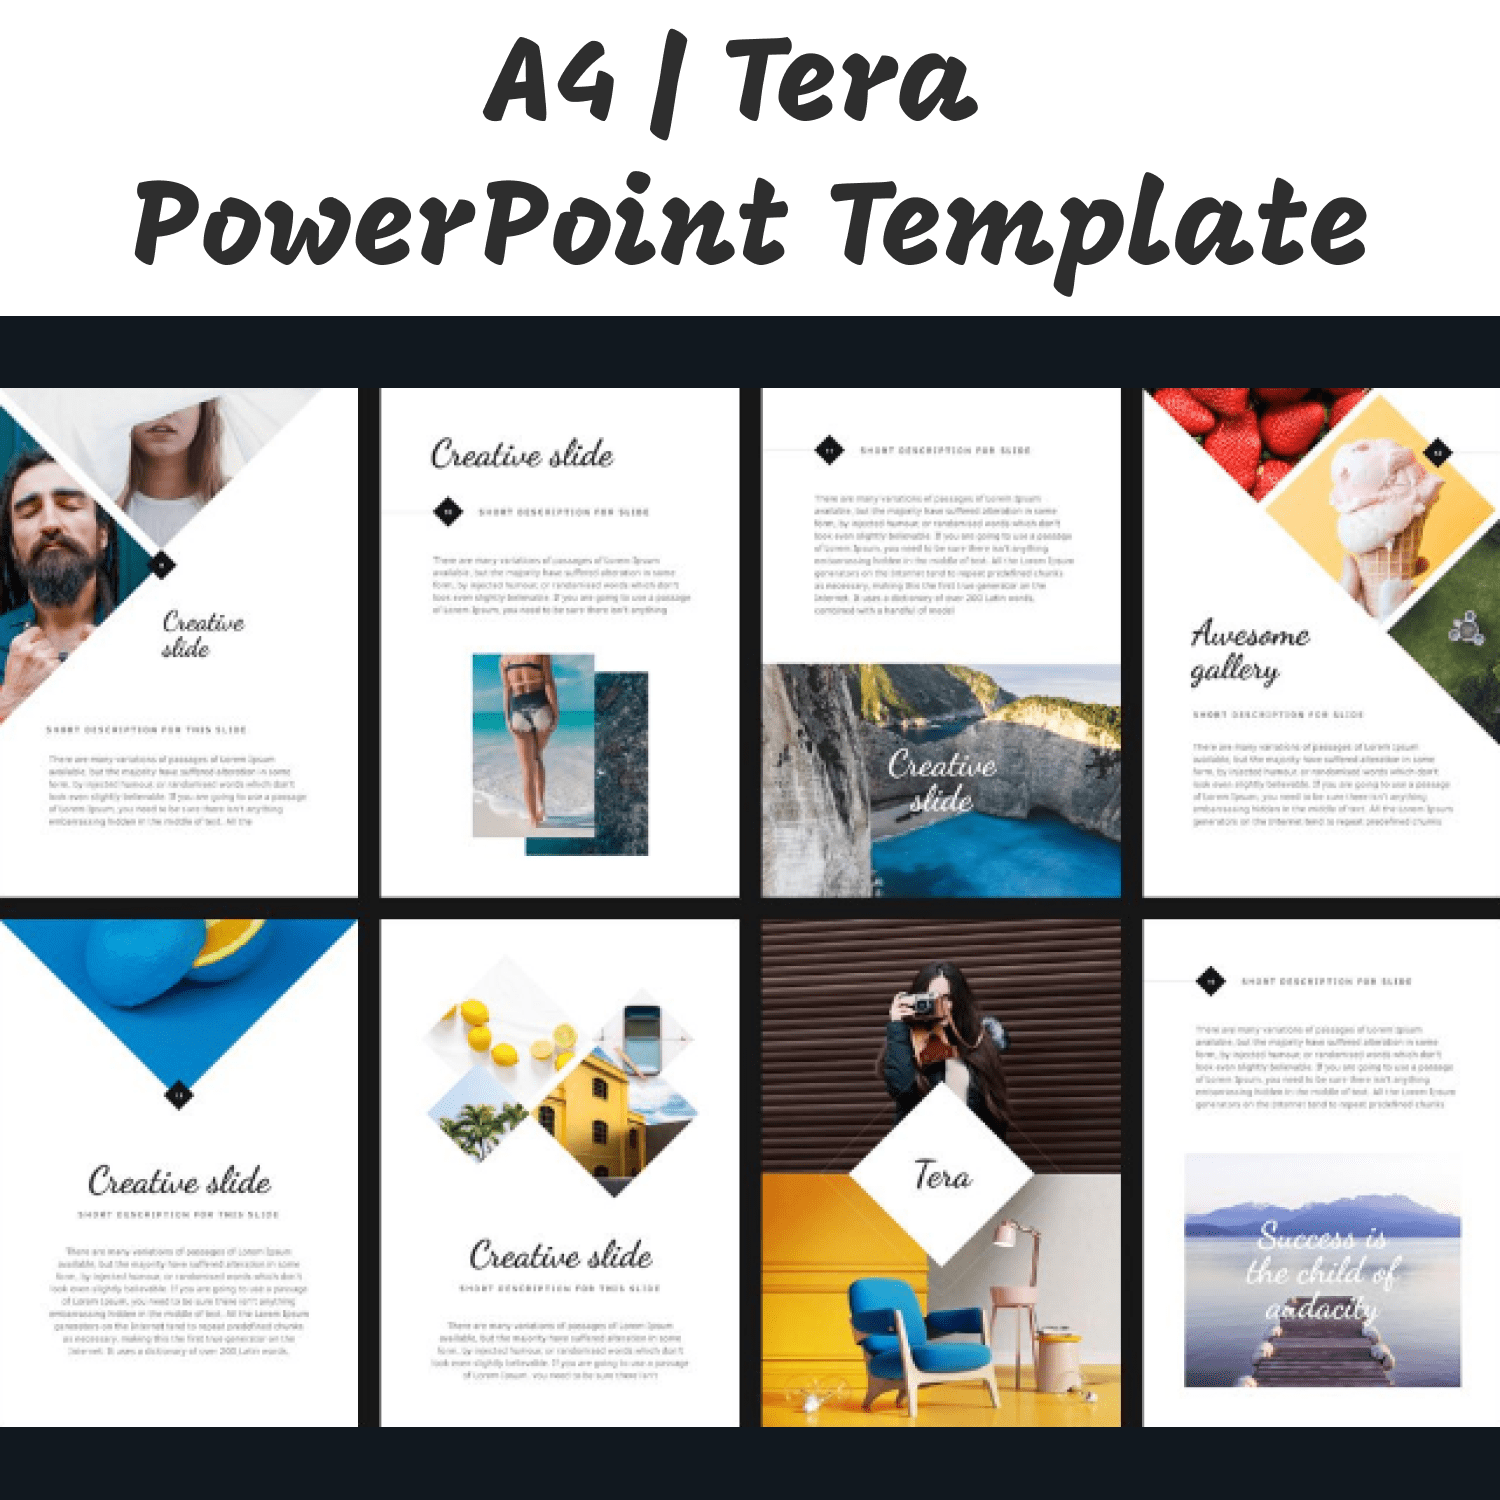 A4 | Tera PowerPoint Template cover image.